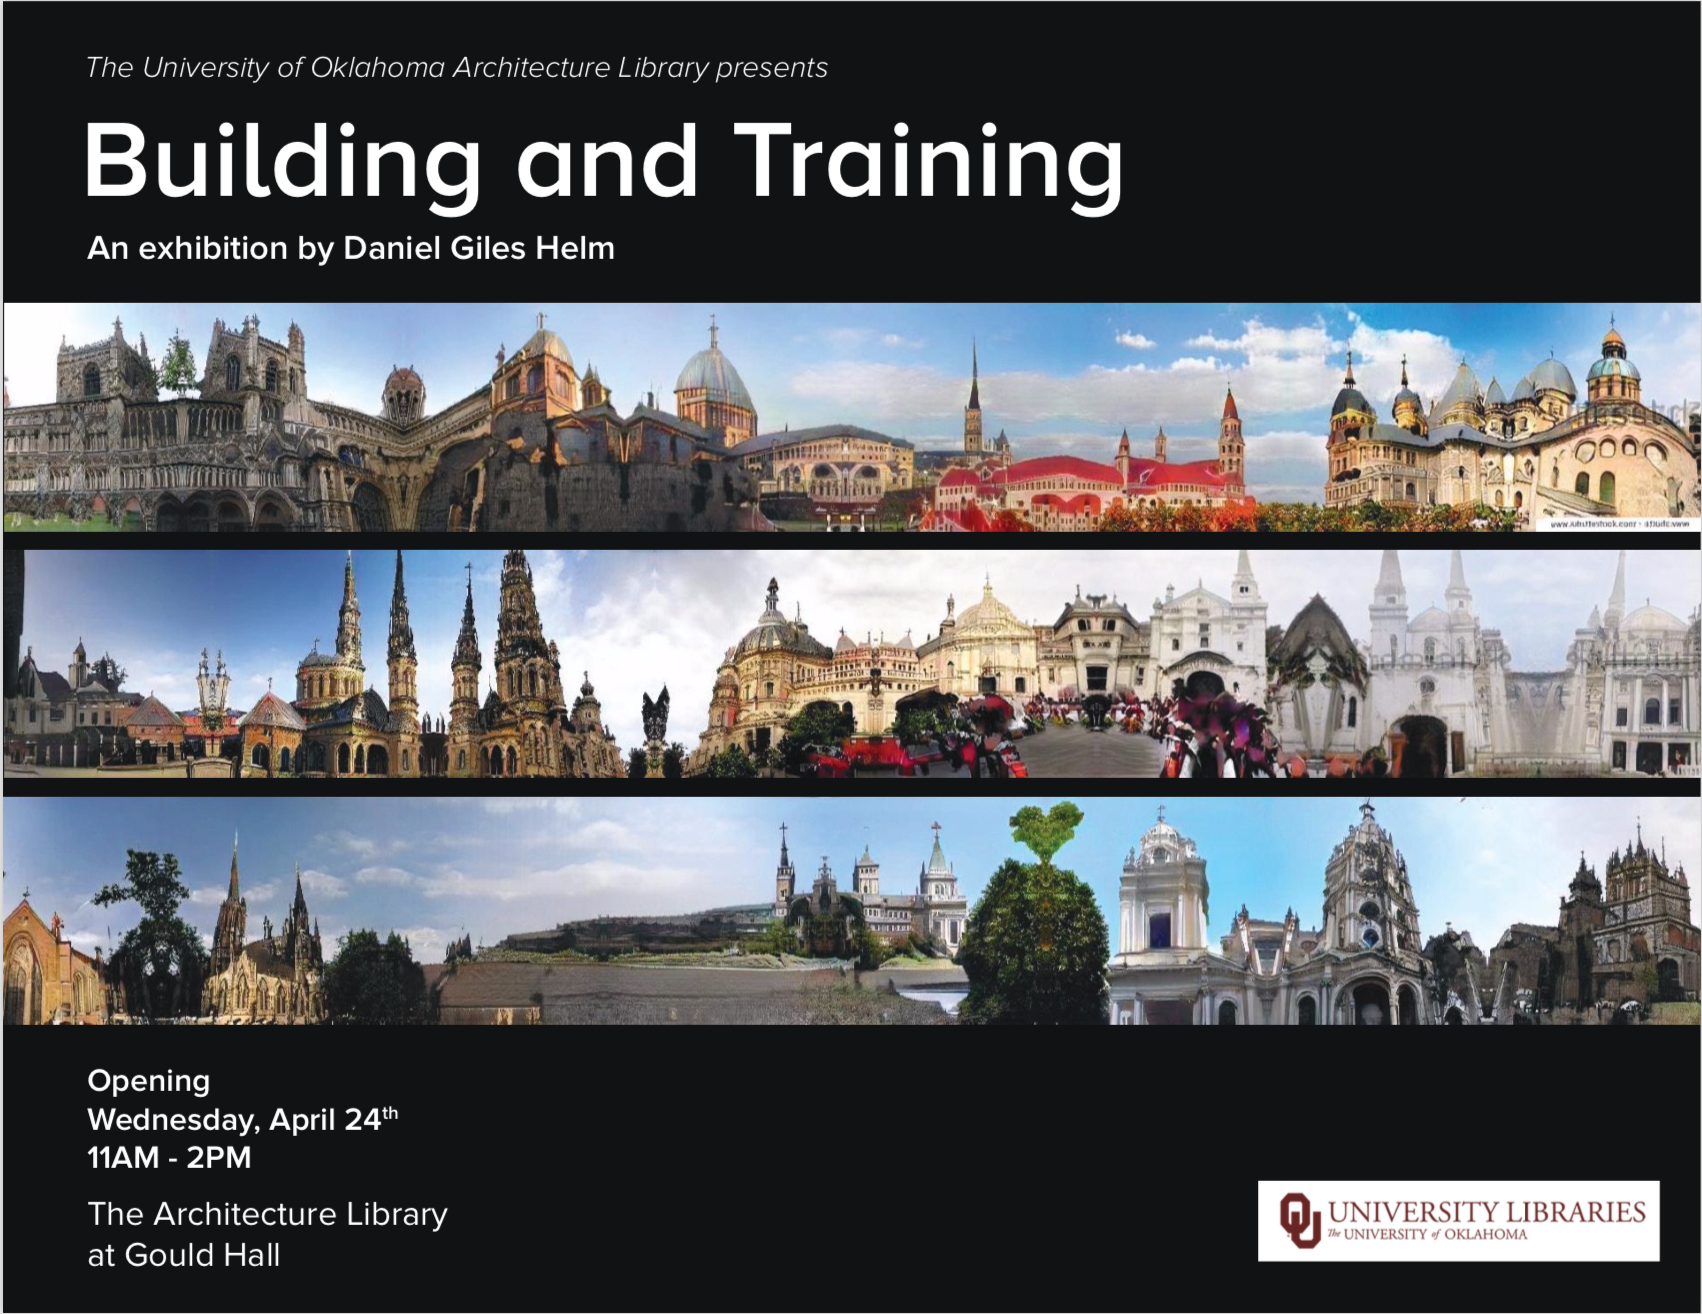 OU Architecture Library to Present “Building and Training” Exhibition